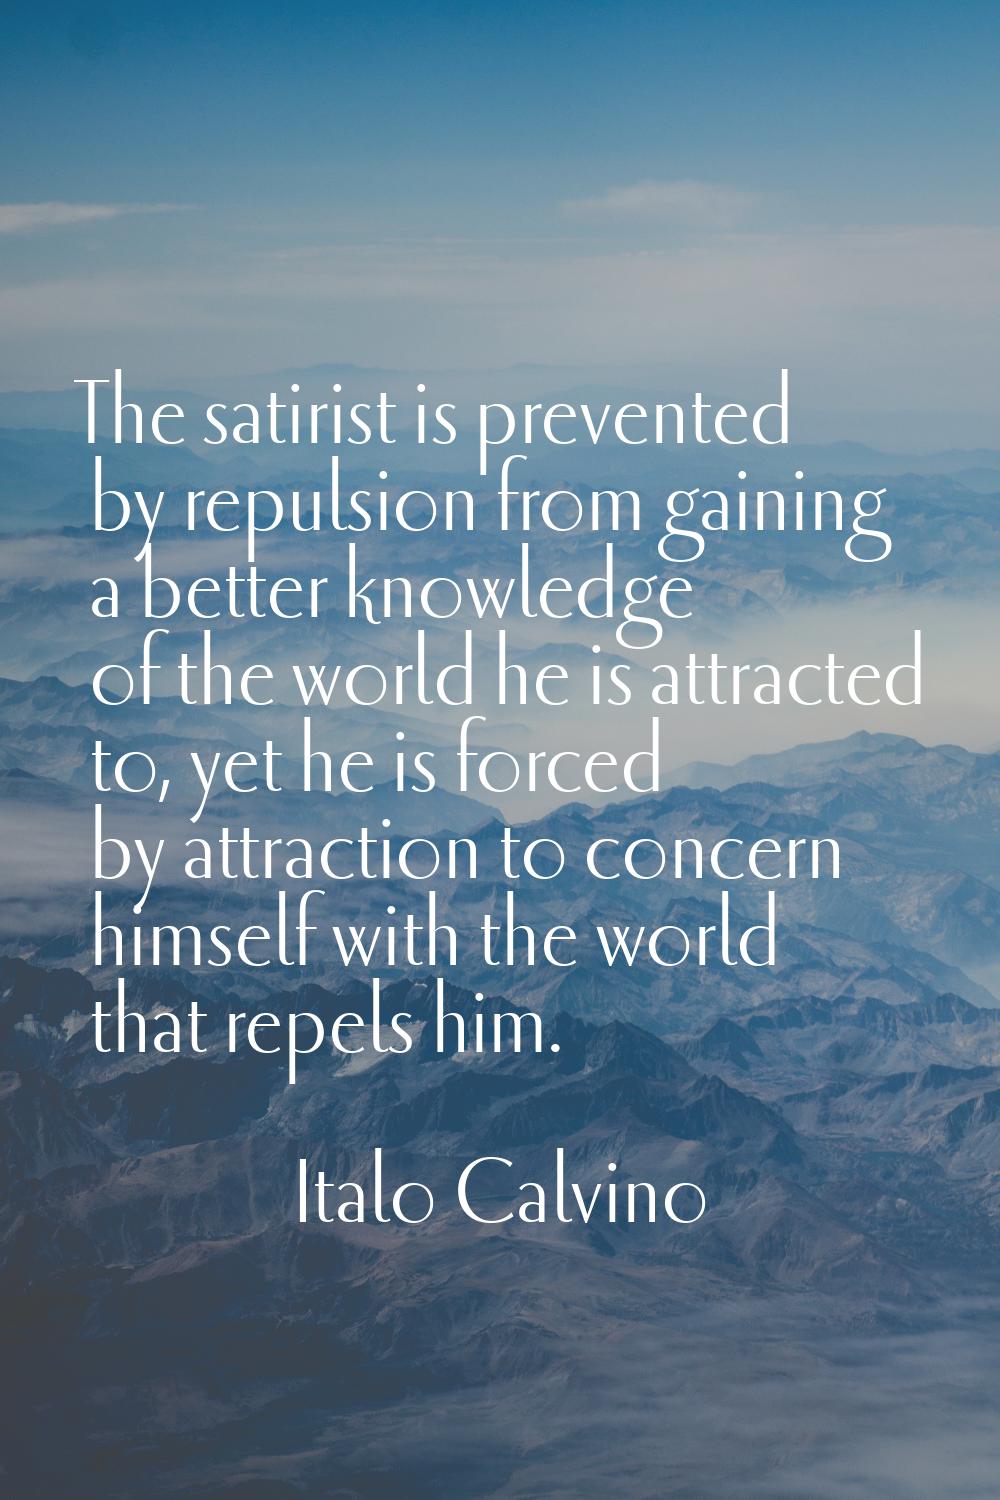 The satirist is prevented by repulsion from gaining a better knowledge of the world he is attracted